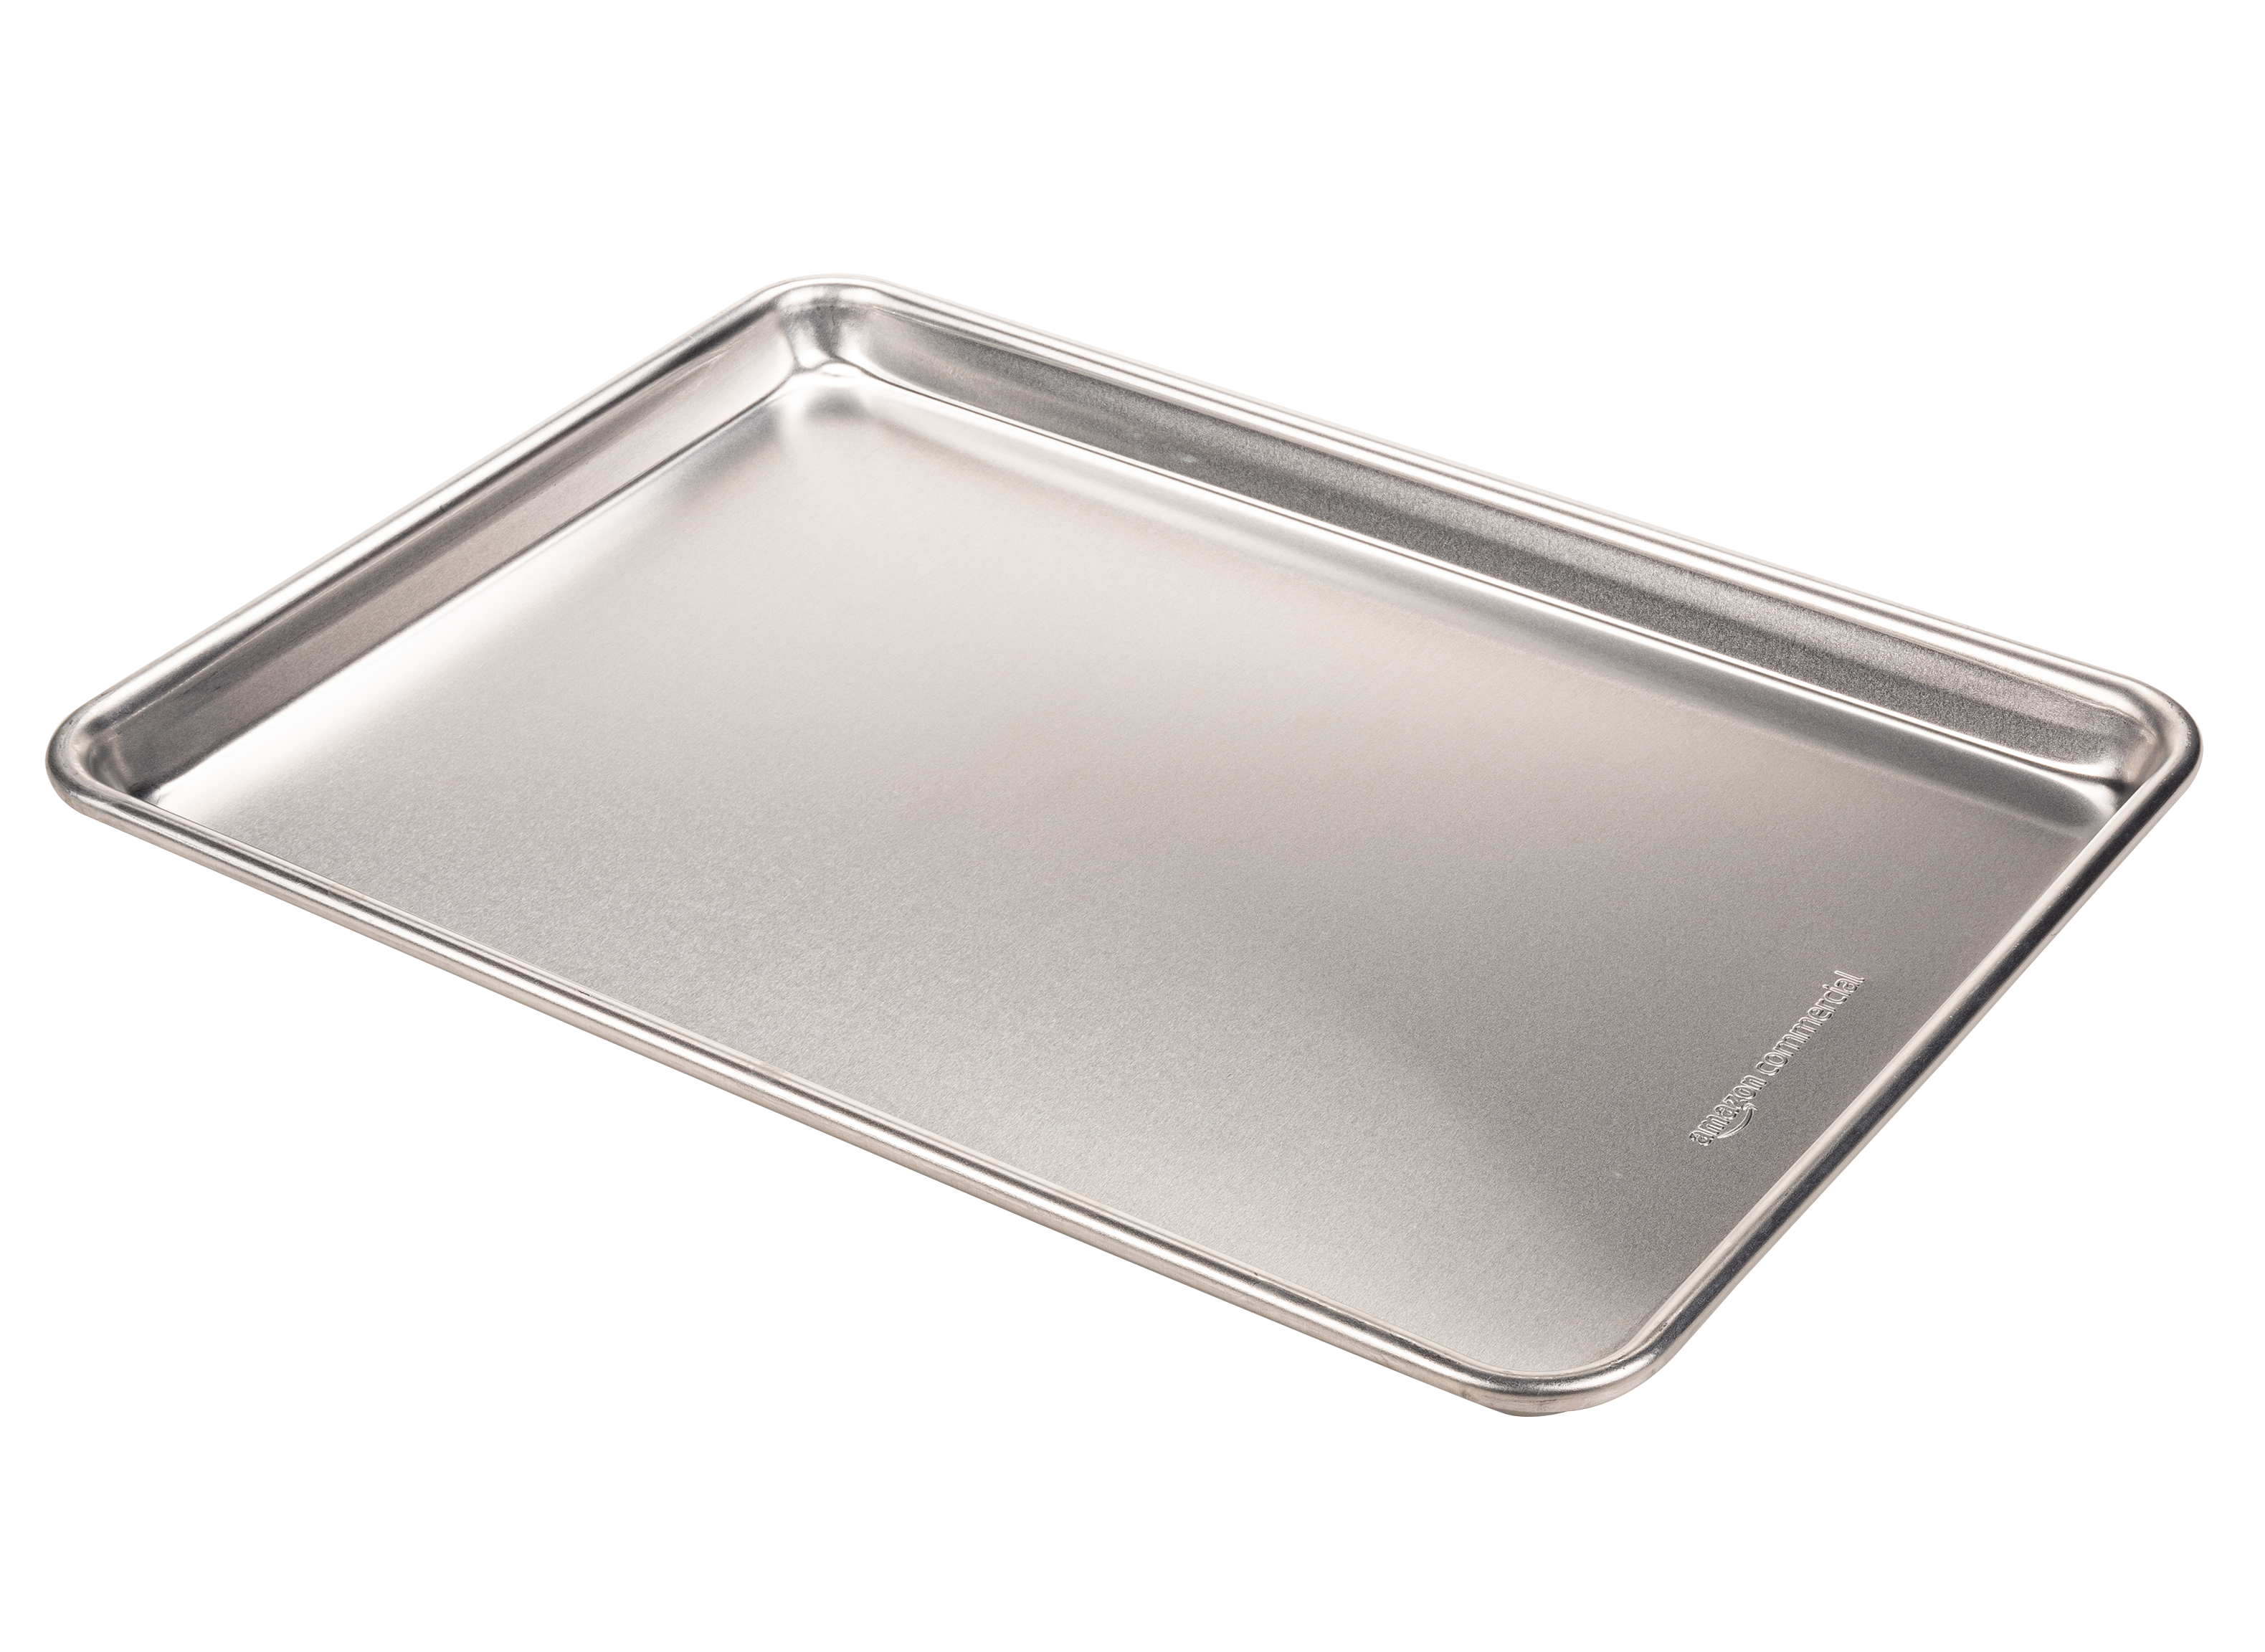 https://crdms.images.consumerreports.org/prod/products/cr/models/404175-sheet-pans-amazoncommercial-aluminum-baking-half-sheet-pan-2-pack-10022109.png